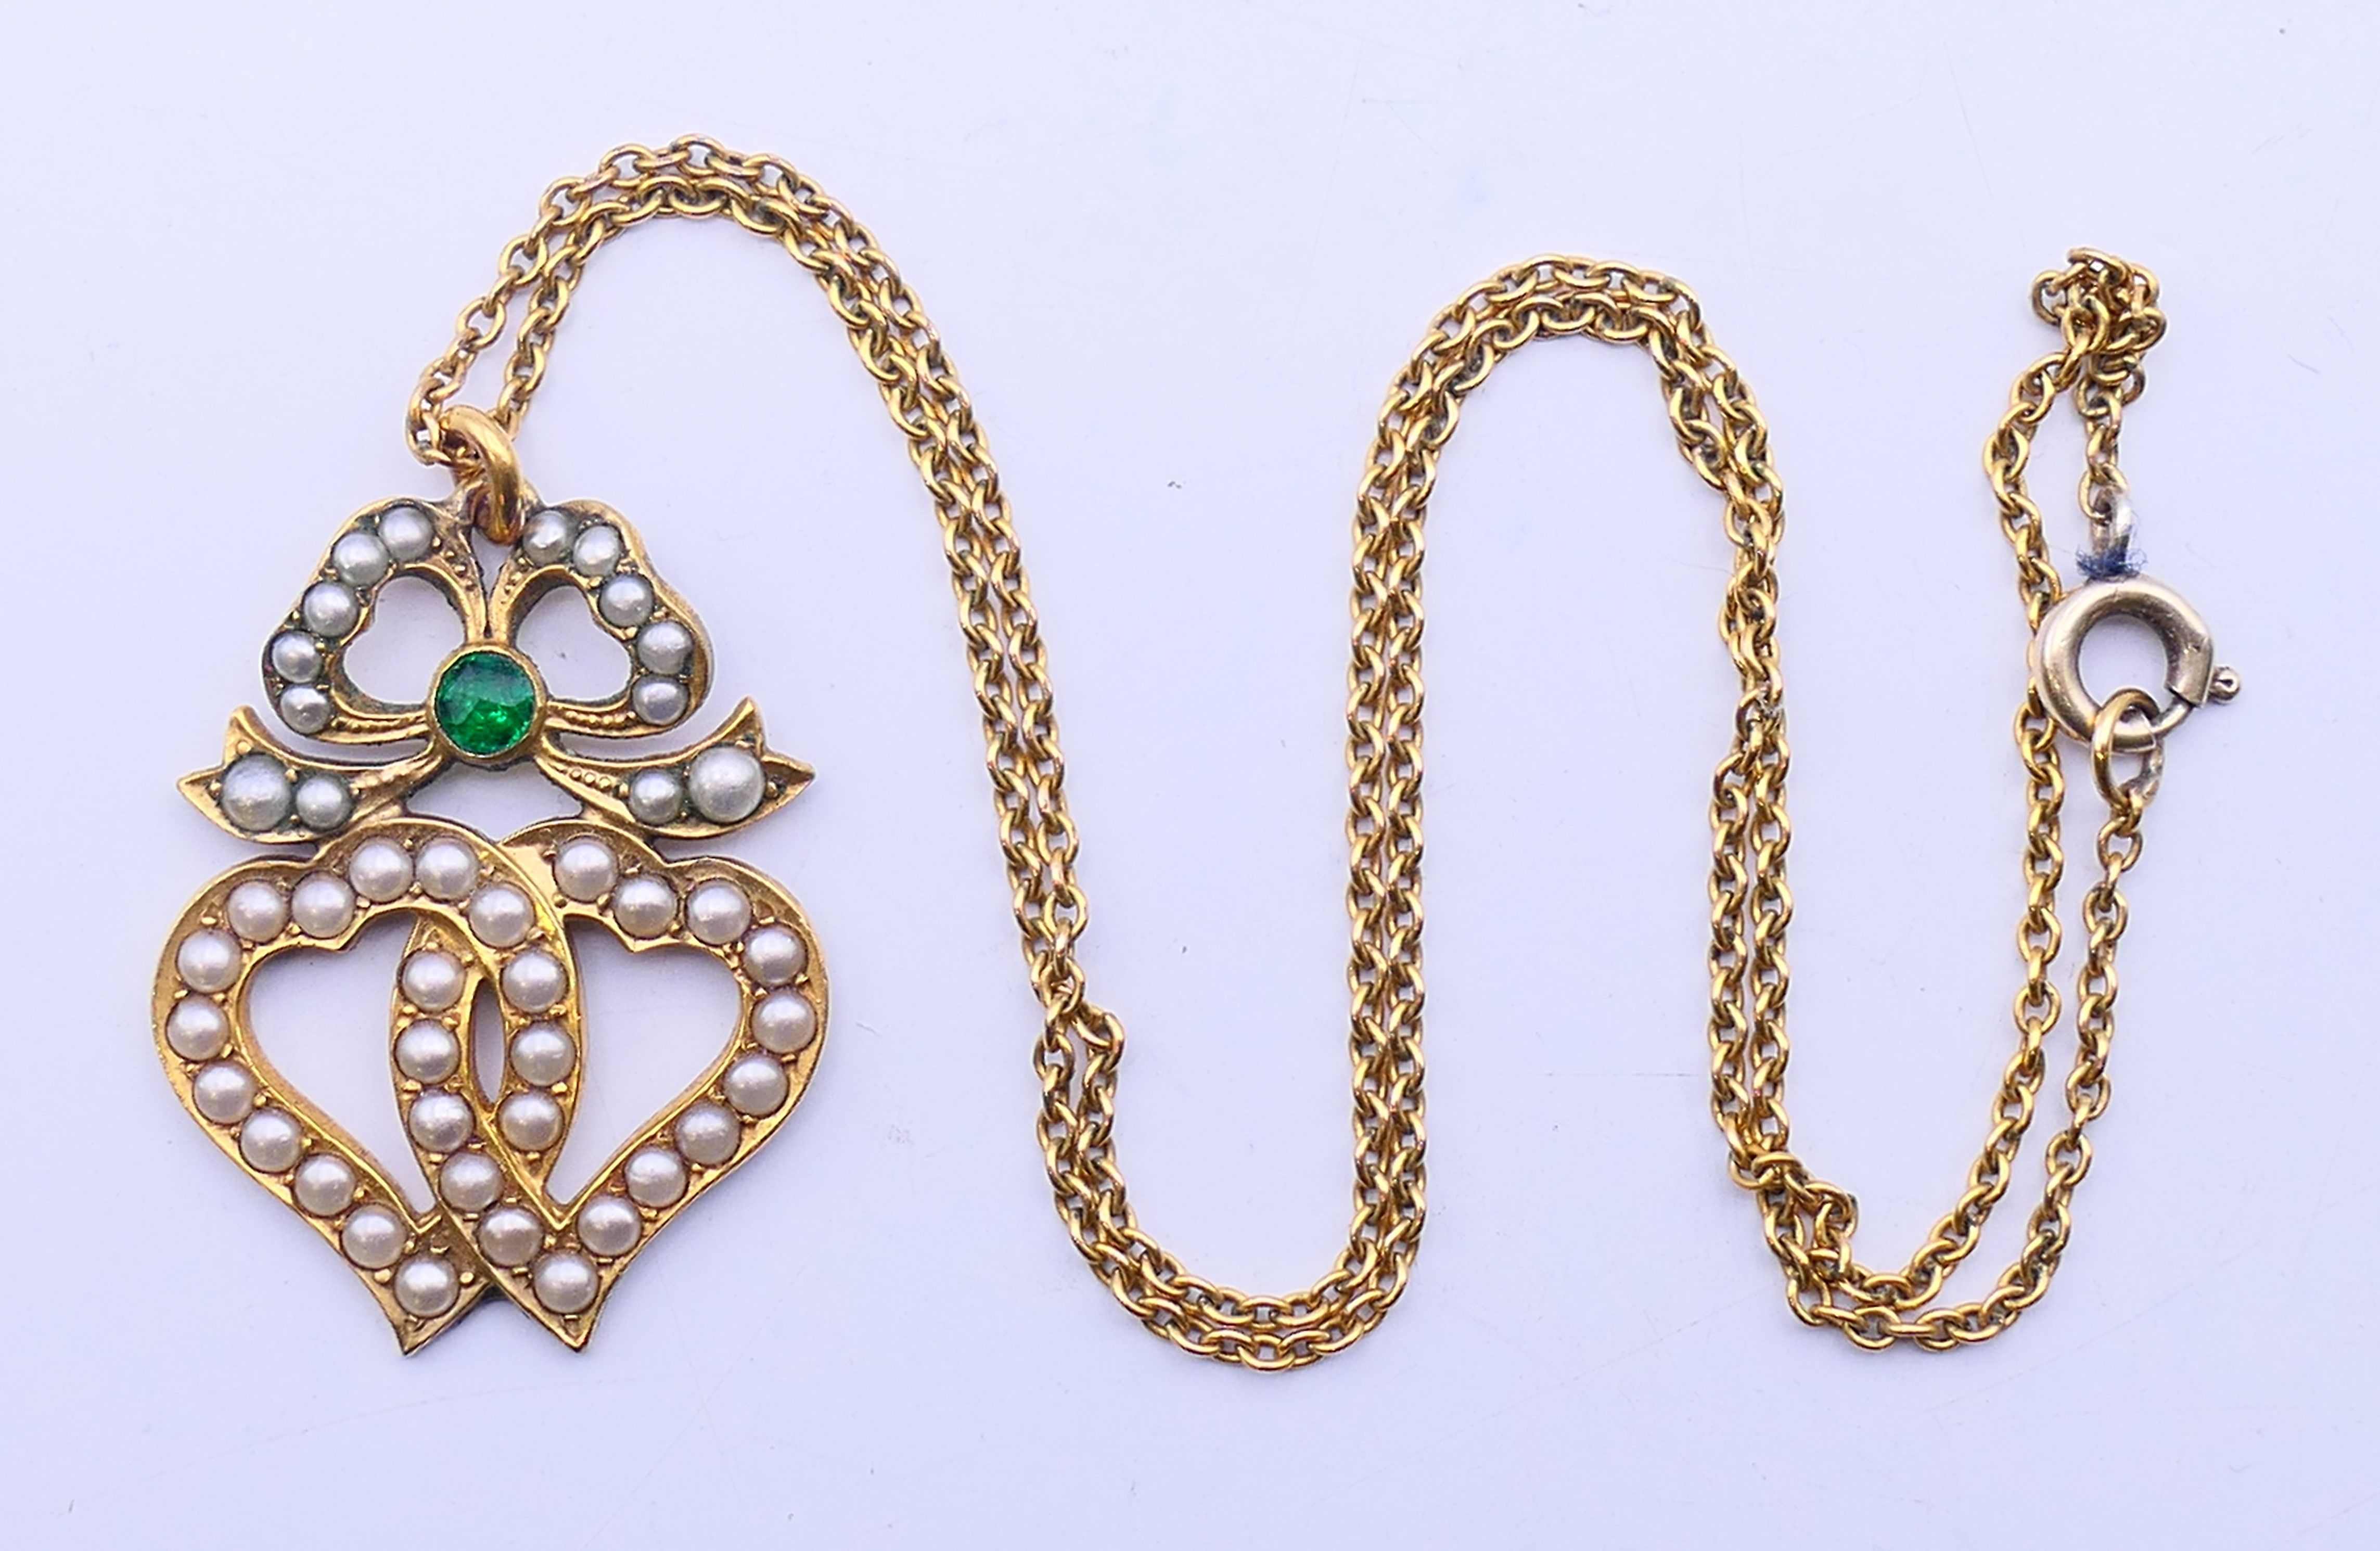 Two Edwardian pendant necklaces, one on a 9 ct gold chain, and a gilt metal and amethyst bracelet. - Image 5 of 14